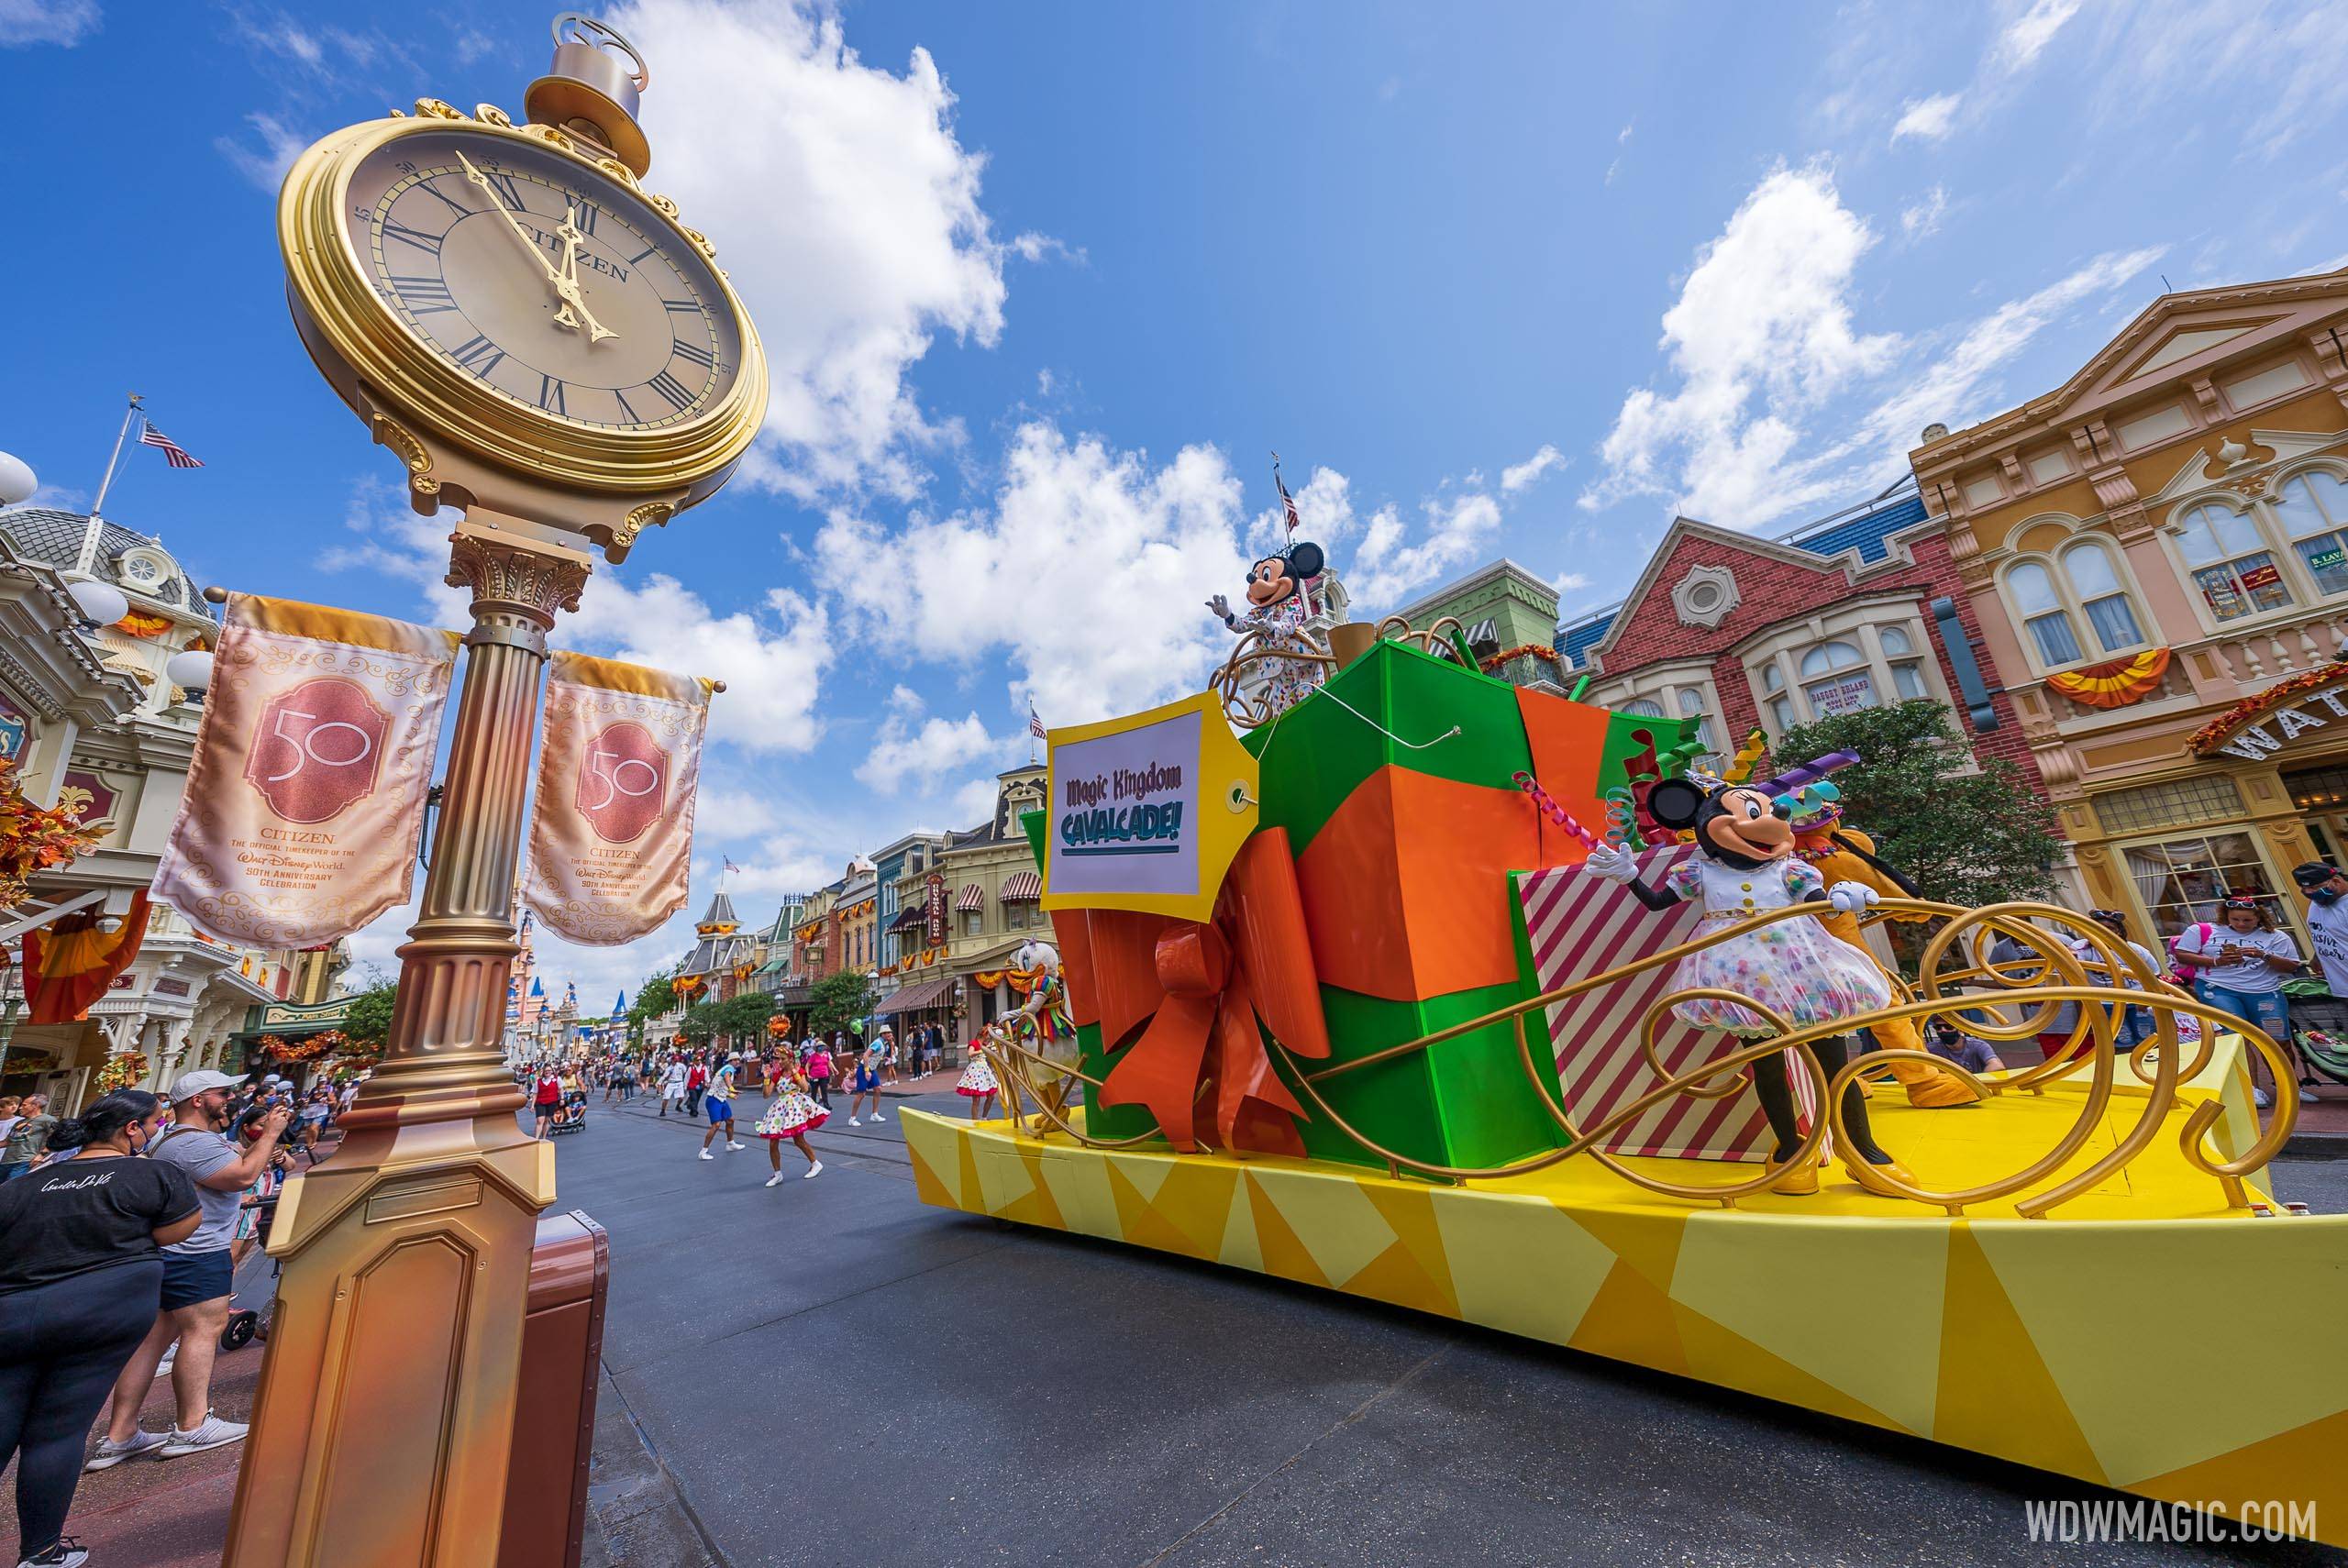 Magic Kingdom will now close at 10pm during late February 2022